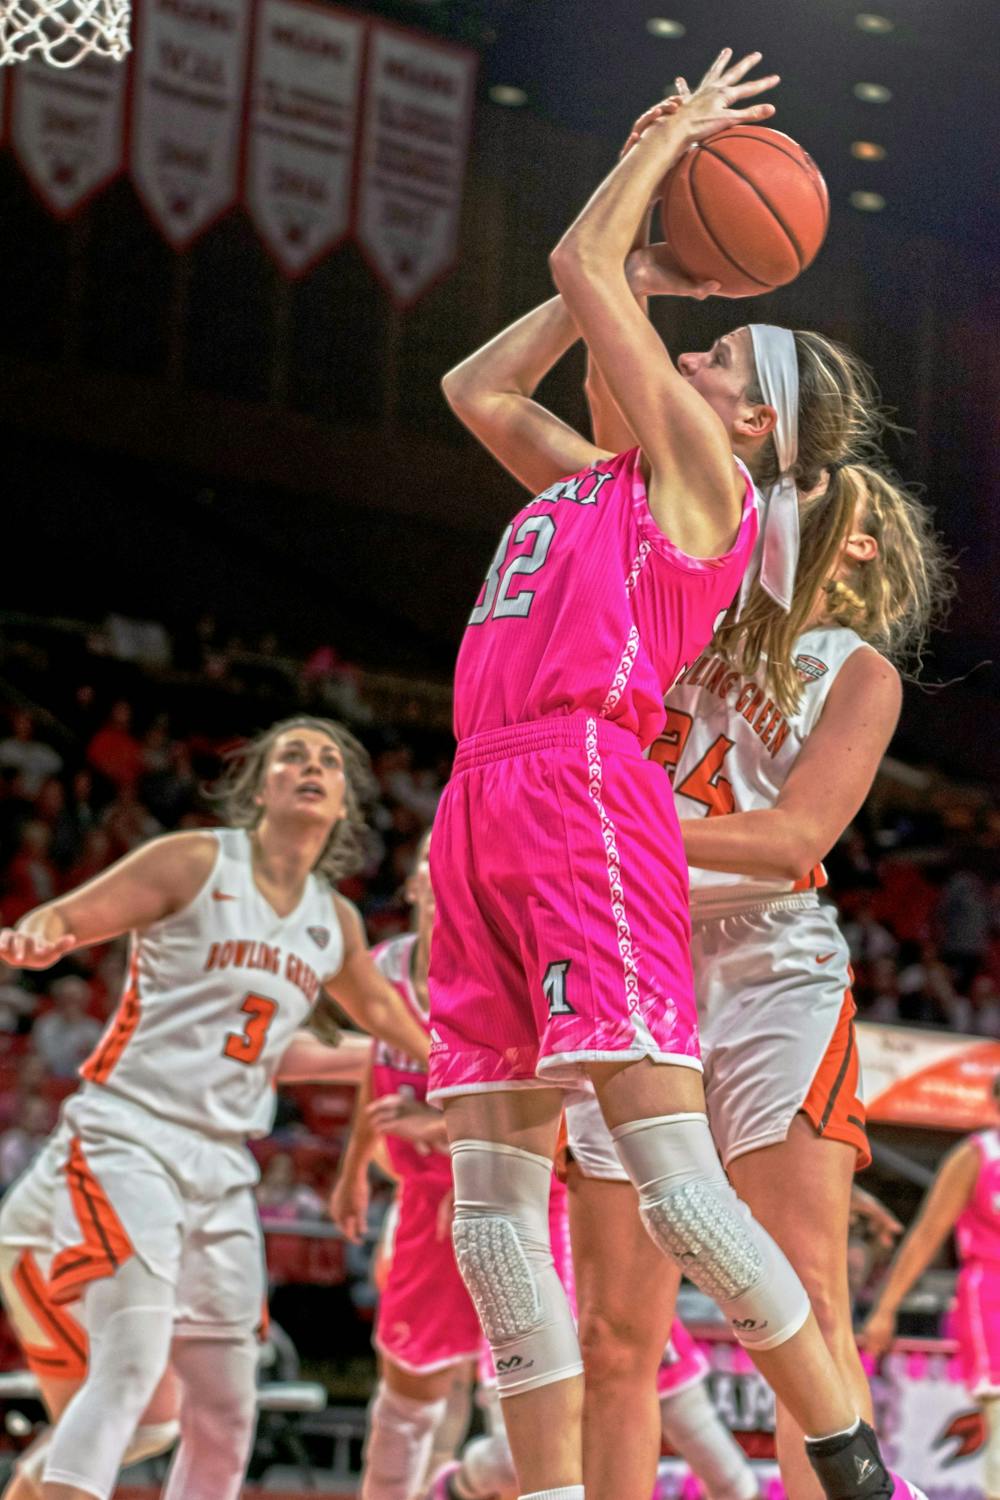 Savannah Kluesner attempts a layup during Miami&#x27;s 75-62 victory over the Bowling Green Falcons Feb. 23, 2019, at Millett Hall. Kluesner posted an 11-point, 14-rebound double-double.